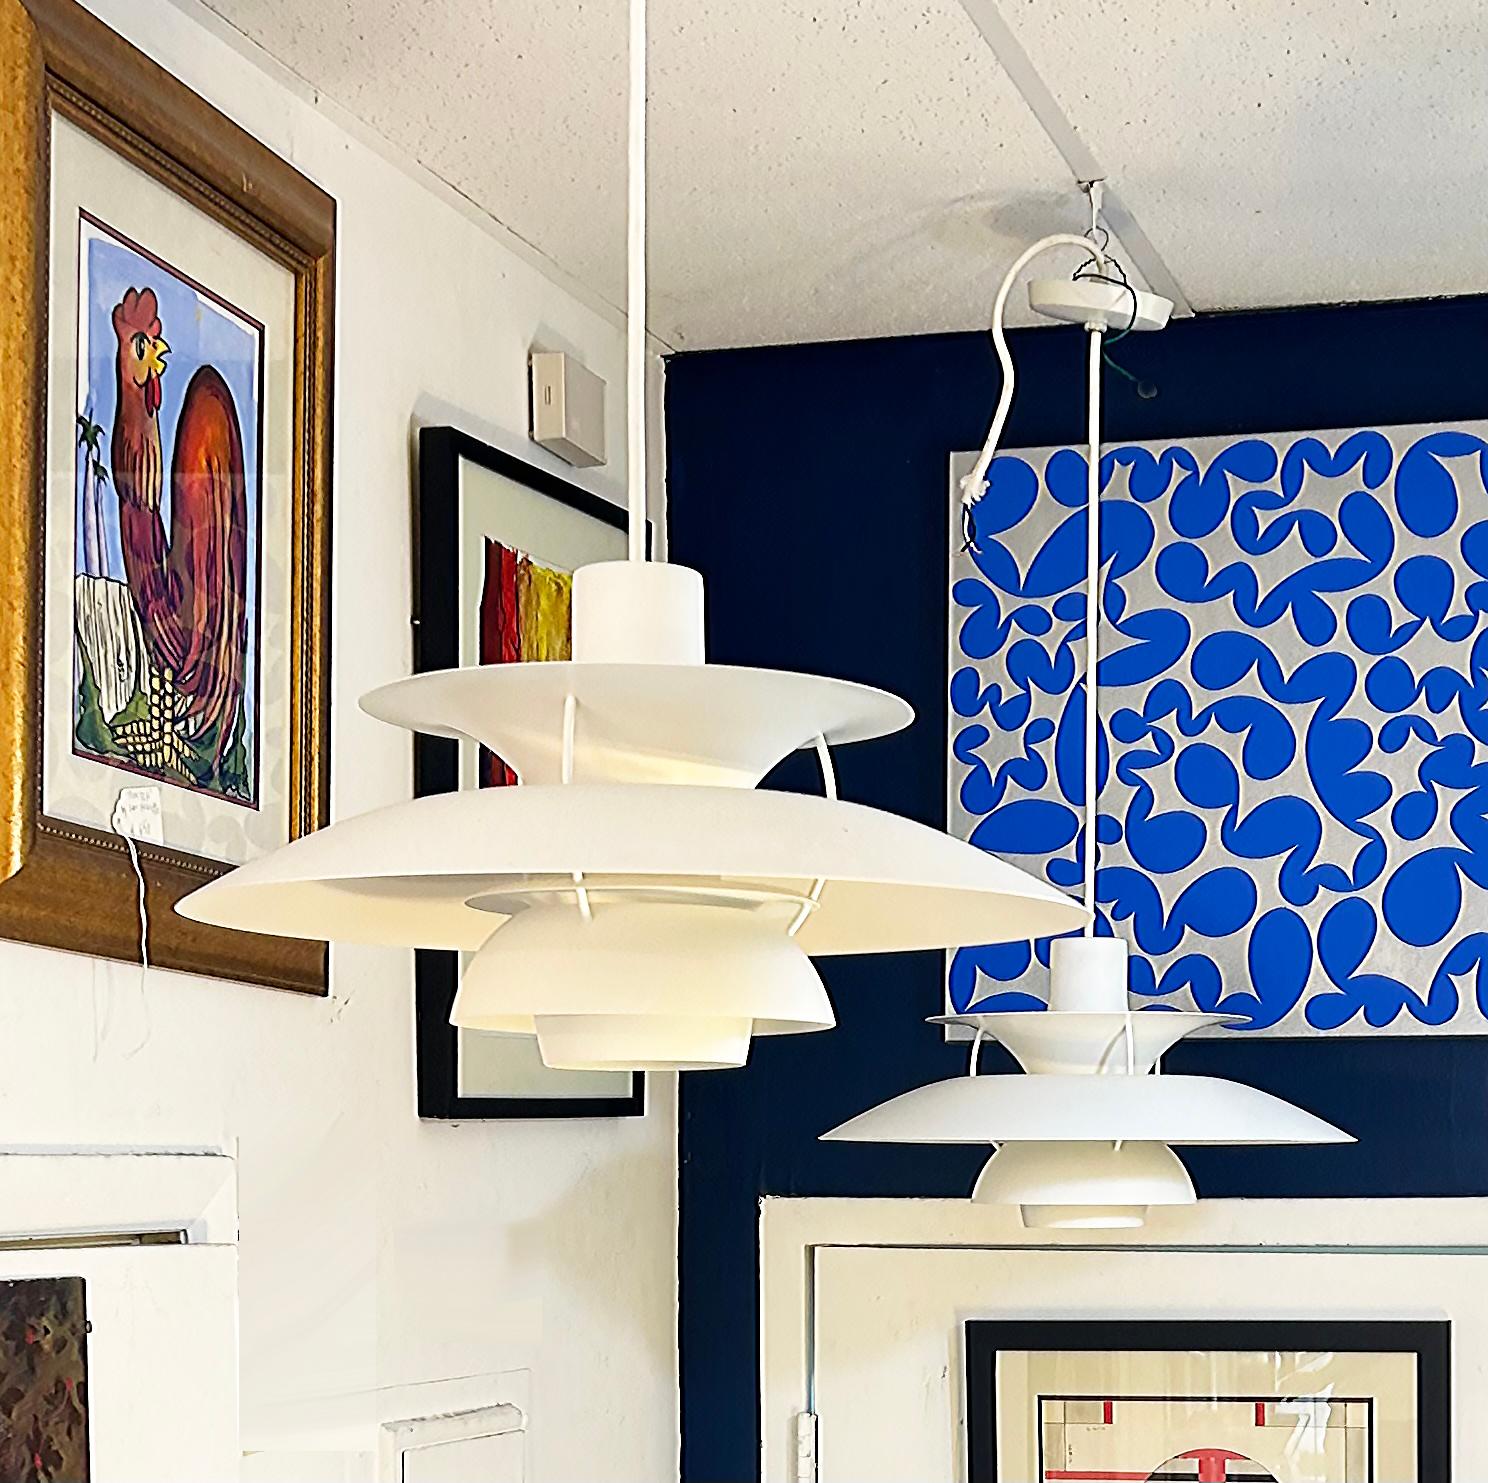 Louis Poulsen PH-5 Pendant Chandeliers for Poul Henningsen

Offered for sale is a classic Louis Poulsen PH-5 white enameled metal pendant chandelier.  This chandelier is by Louis Poulsen for Poul Henningsen. The total height or drop needed is